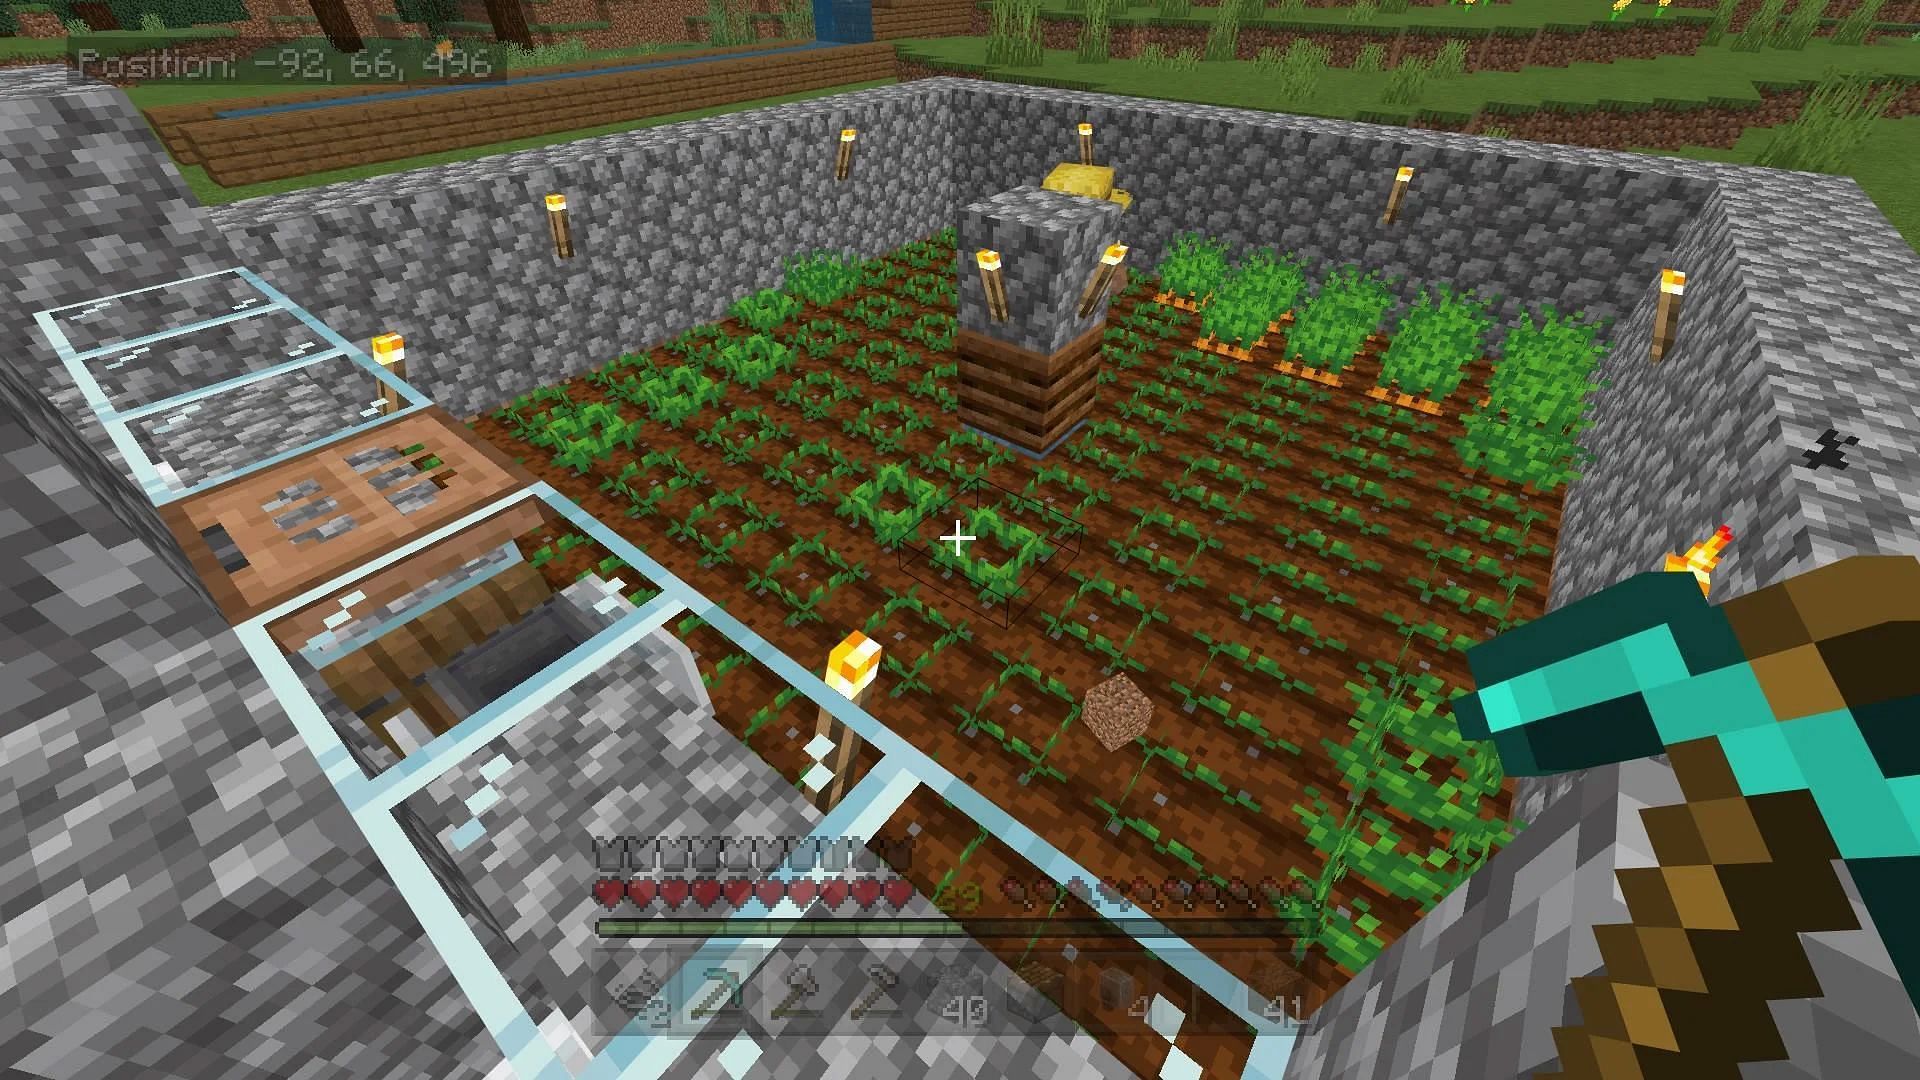 Farms to build in a new world (Image via Reddit user Redfre122002)